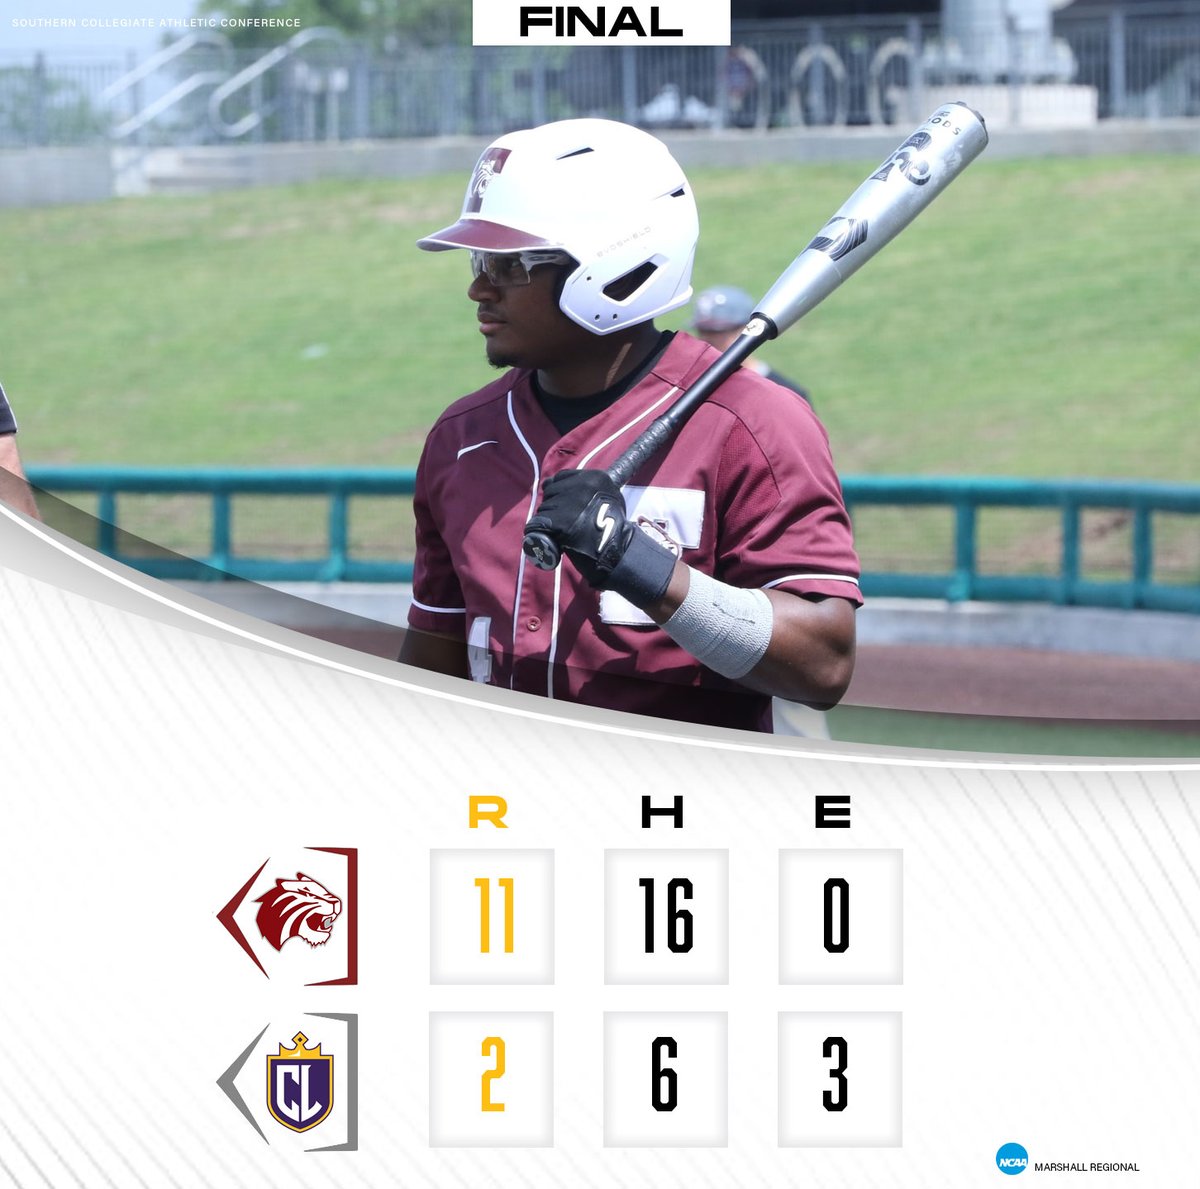 #SCACBsb | @TrinityUTigers bounce back against the Cal Lutheran Kingsmen 11-2.

The Tigers move to the Regional Final tomorrow vs ETBU.

#SCACPride | #d3Bsb